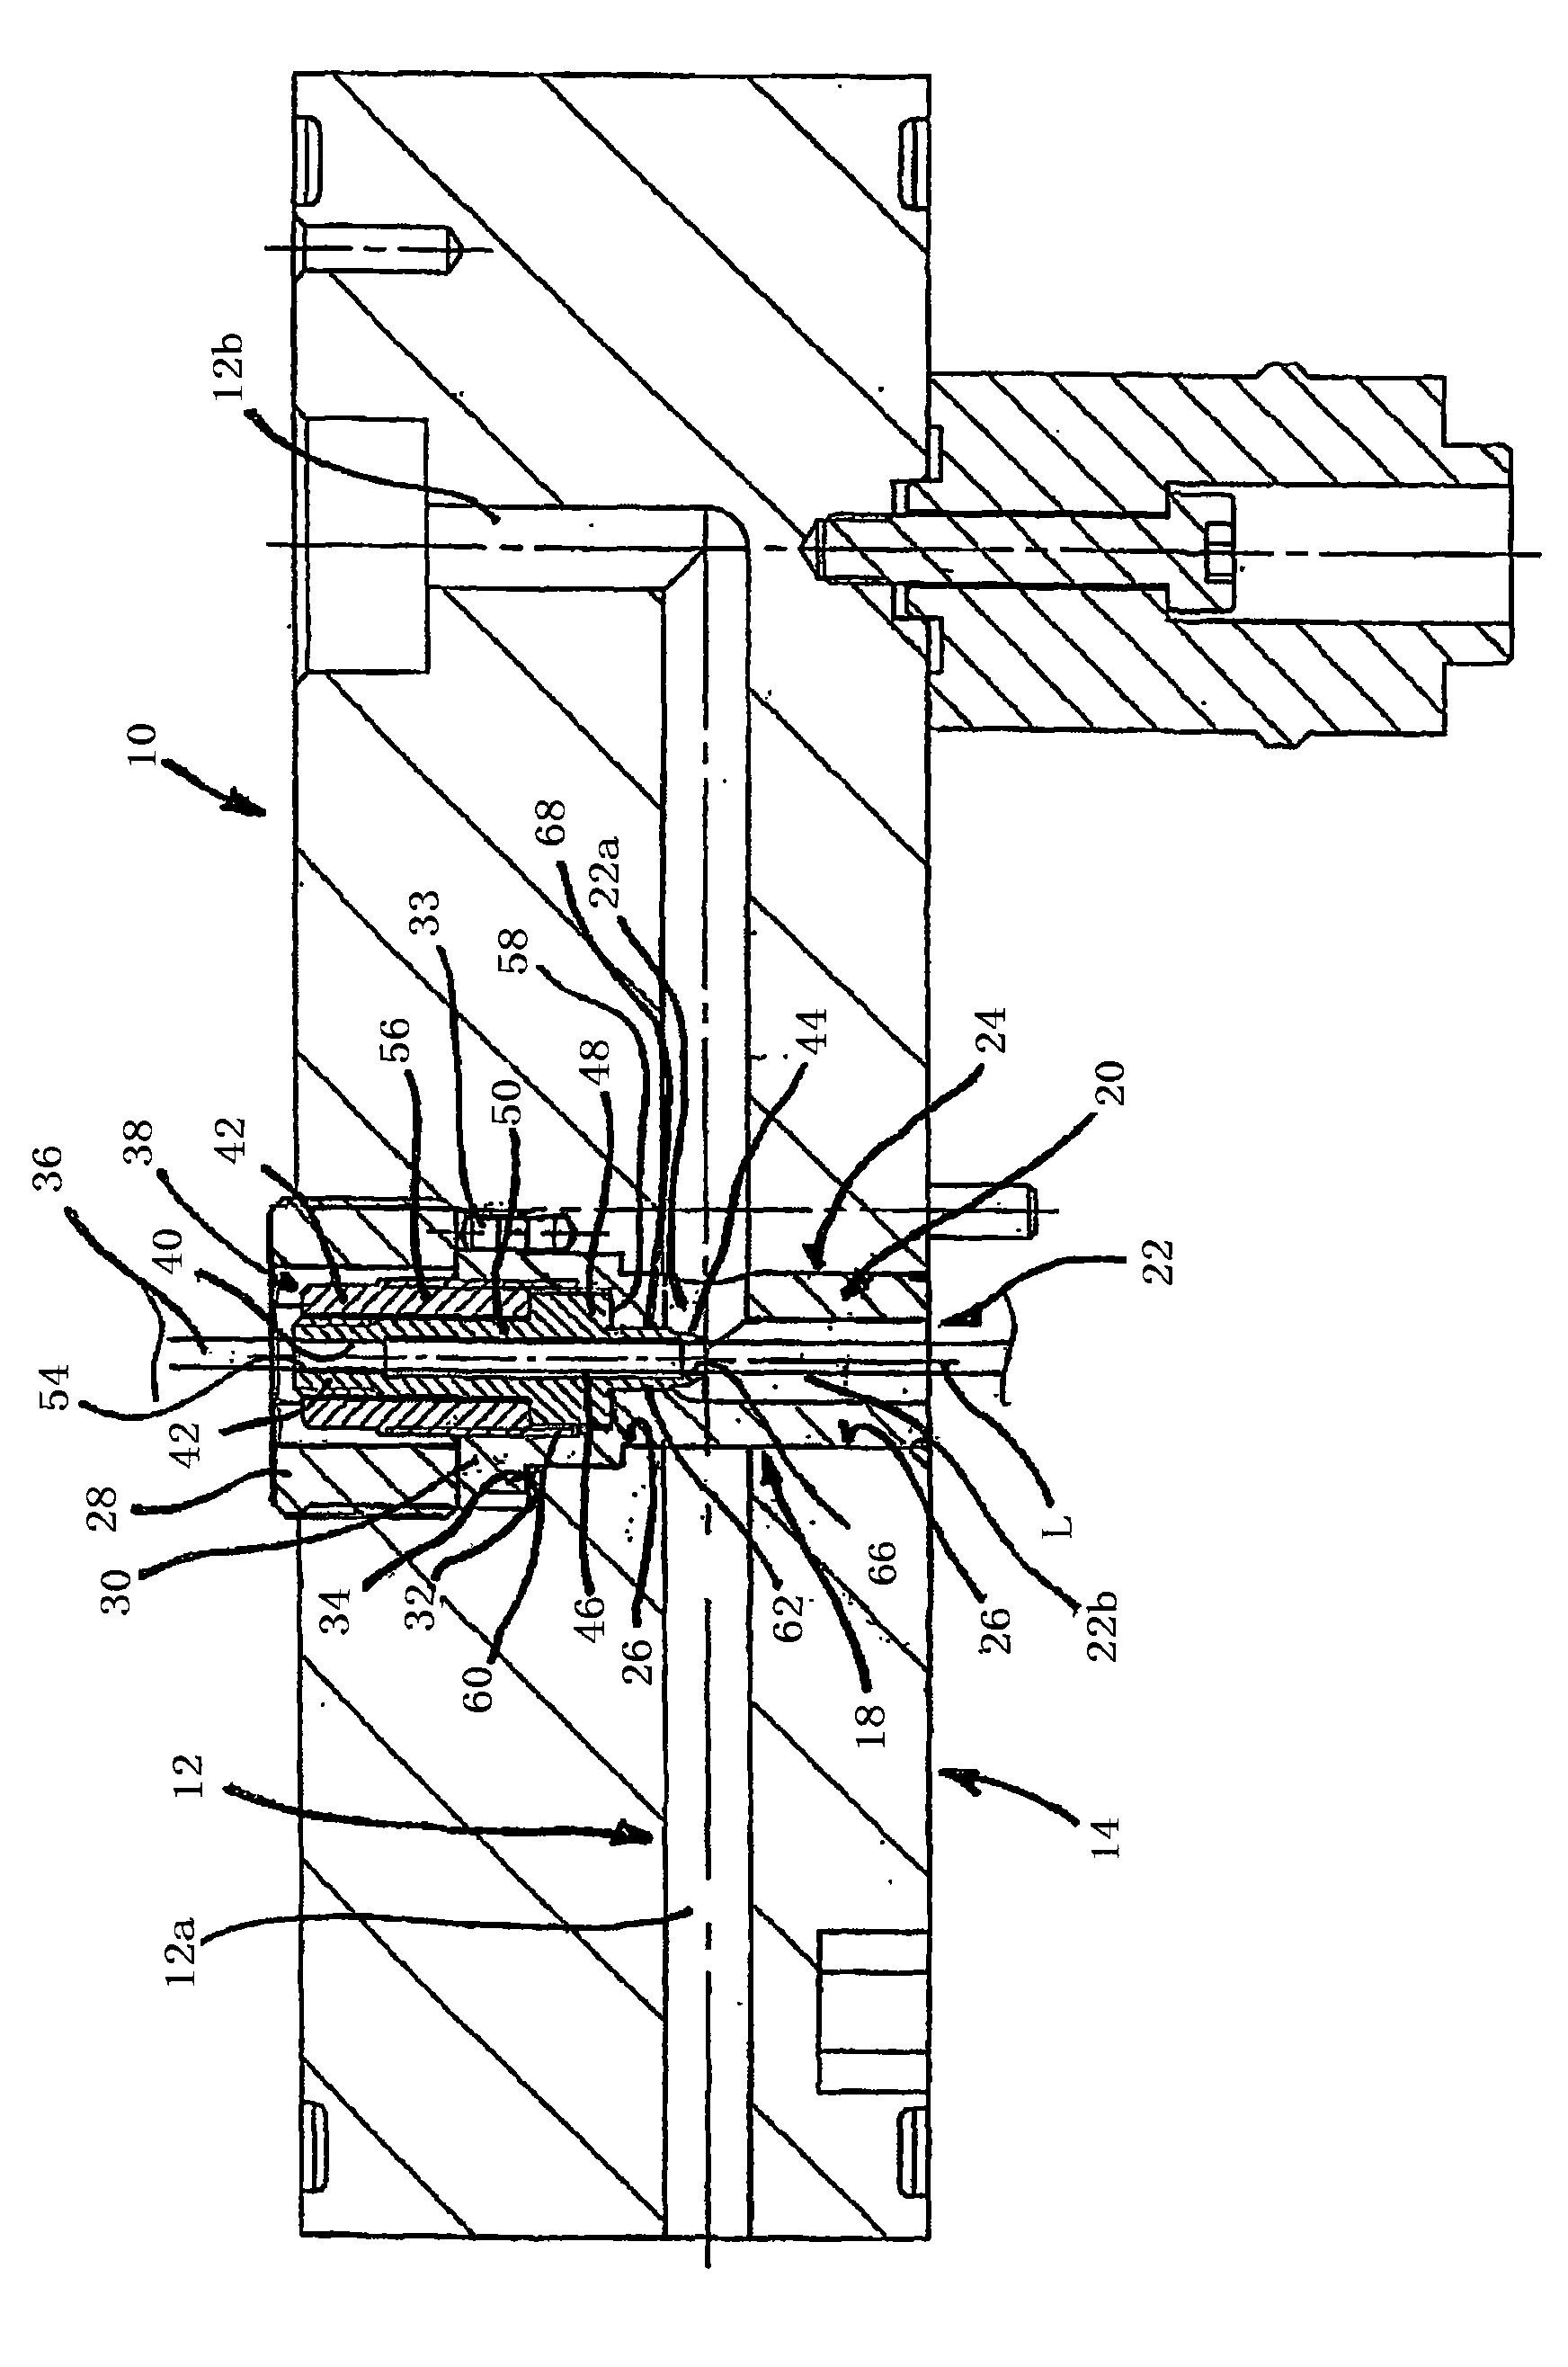 Arrangement for the sealing of channel sections in a hot or cold runner